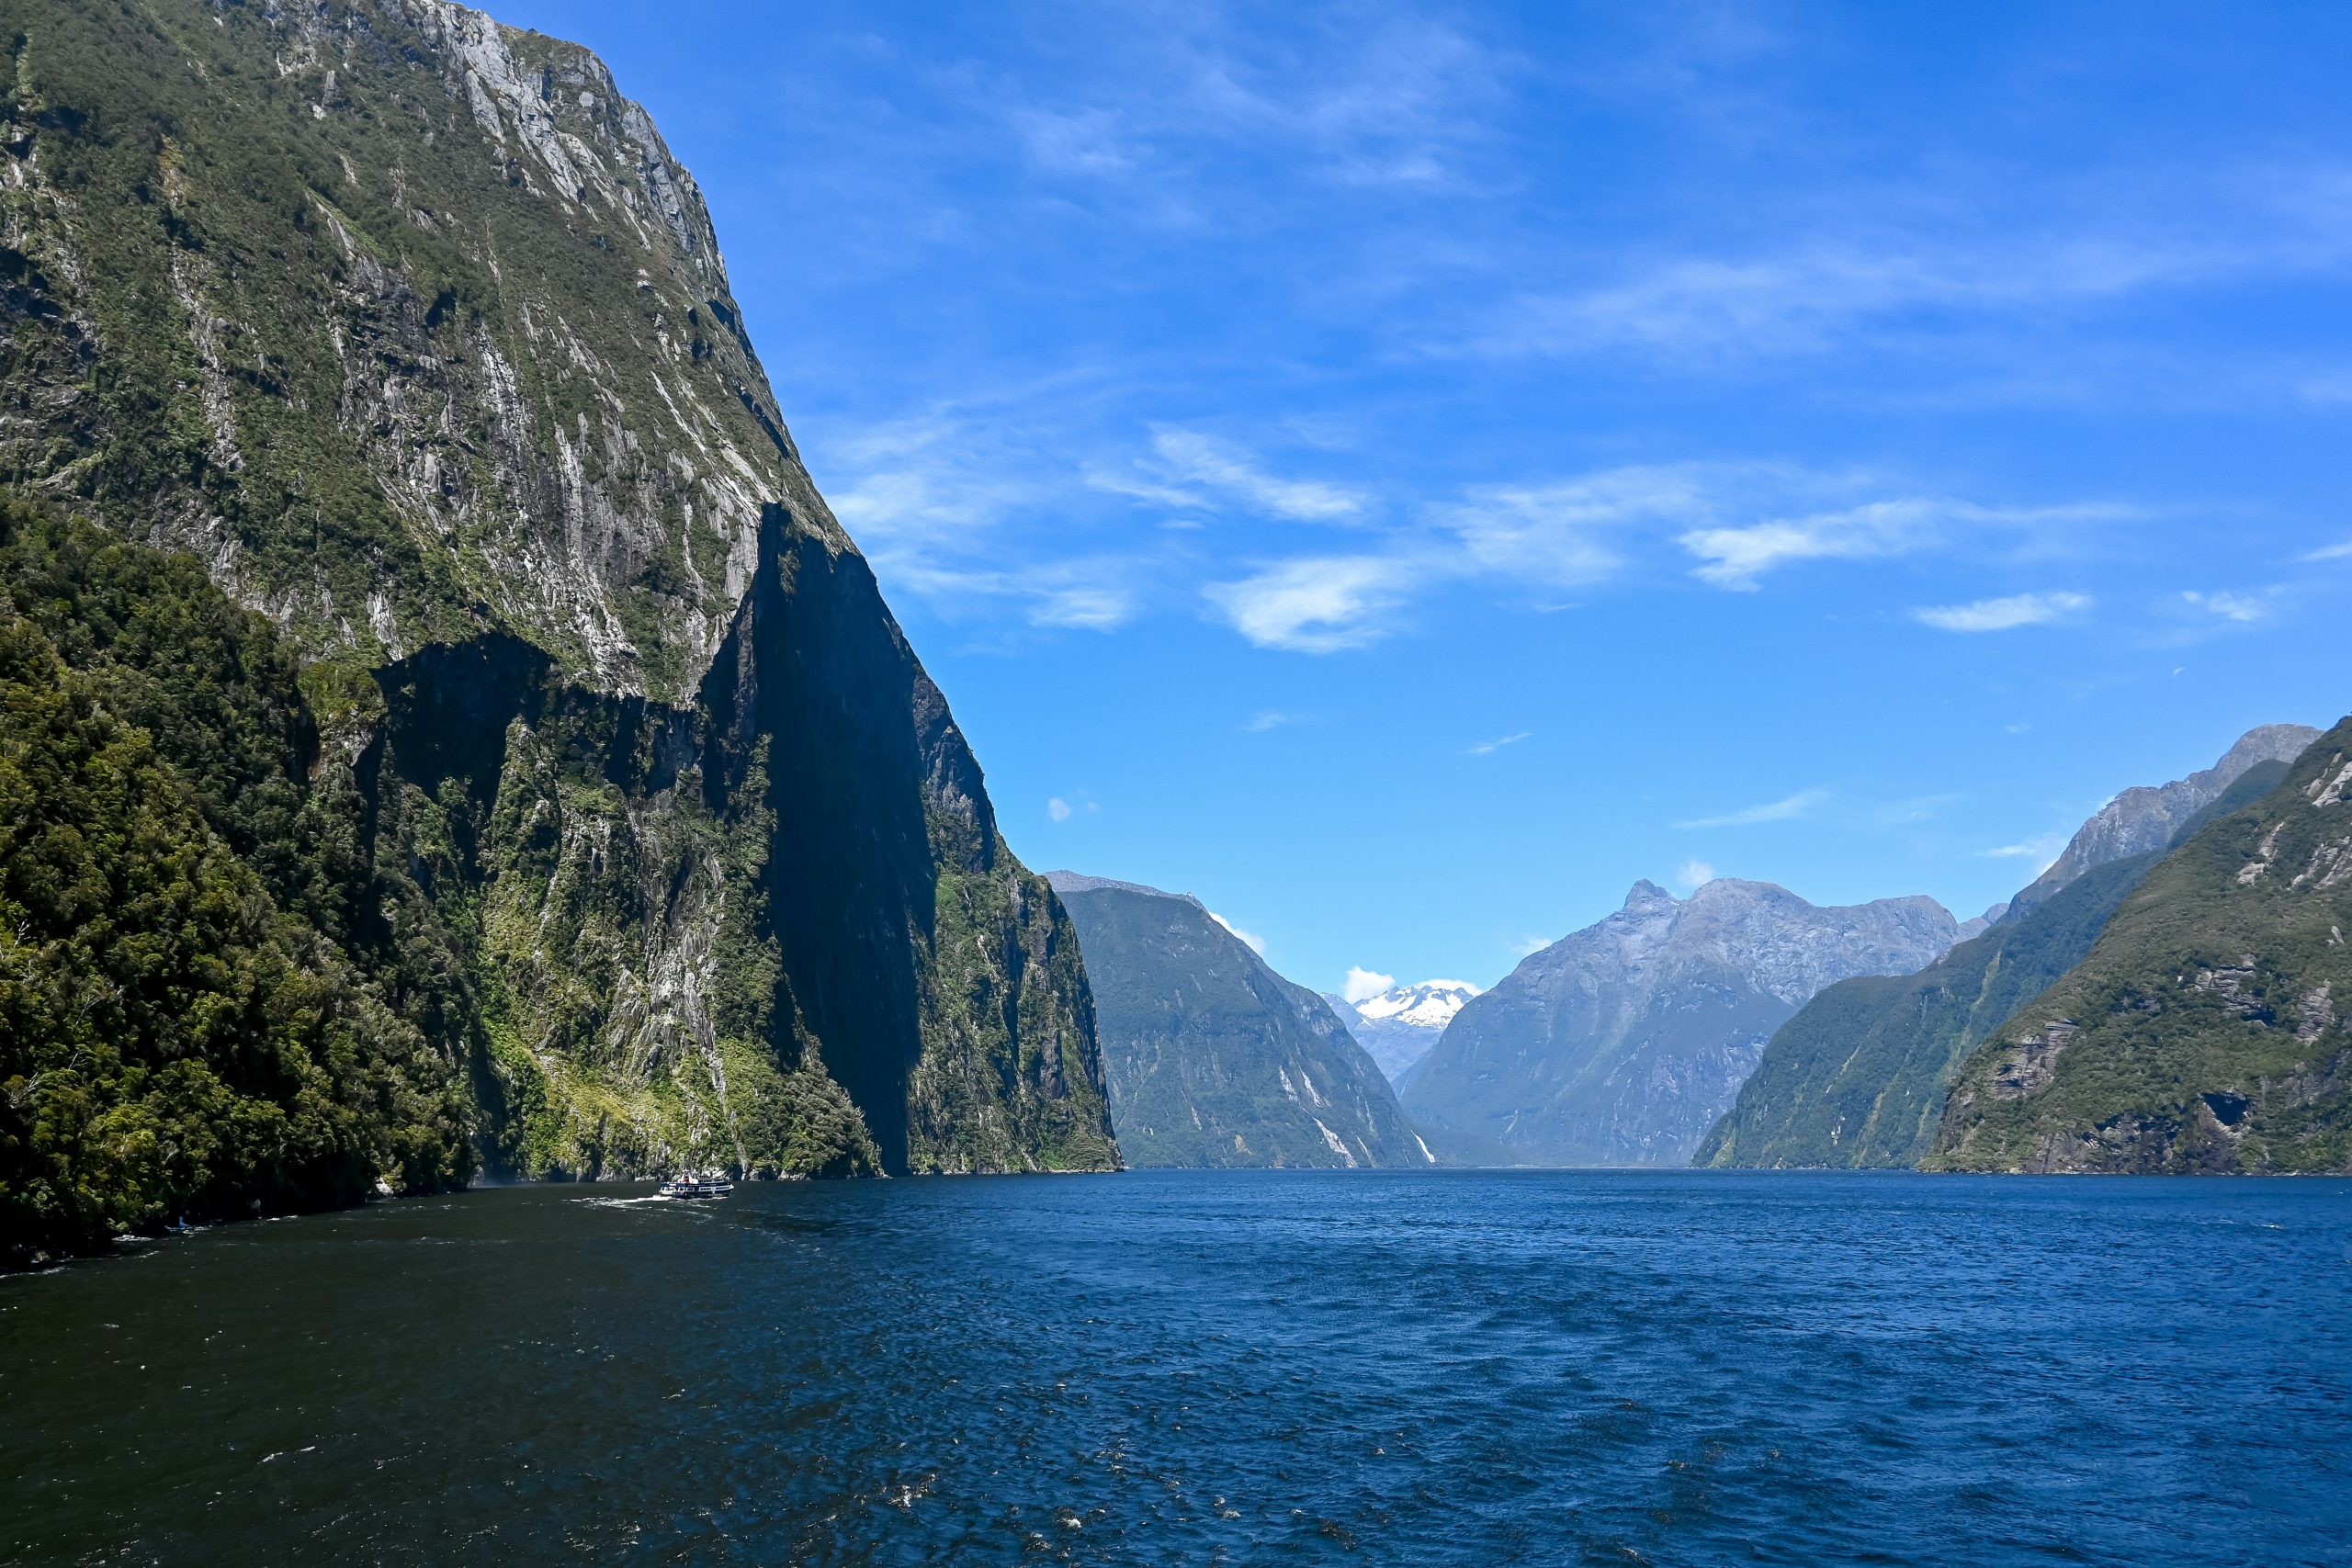 discover the stunning norwegian fjords with our unforgettable fjord cruises. book now for an amazing experience in one of the world's most breathtaking natural wonders.